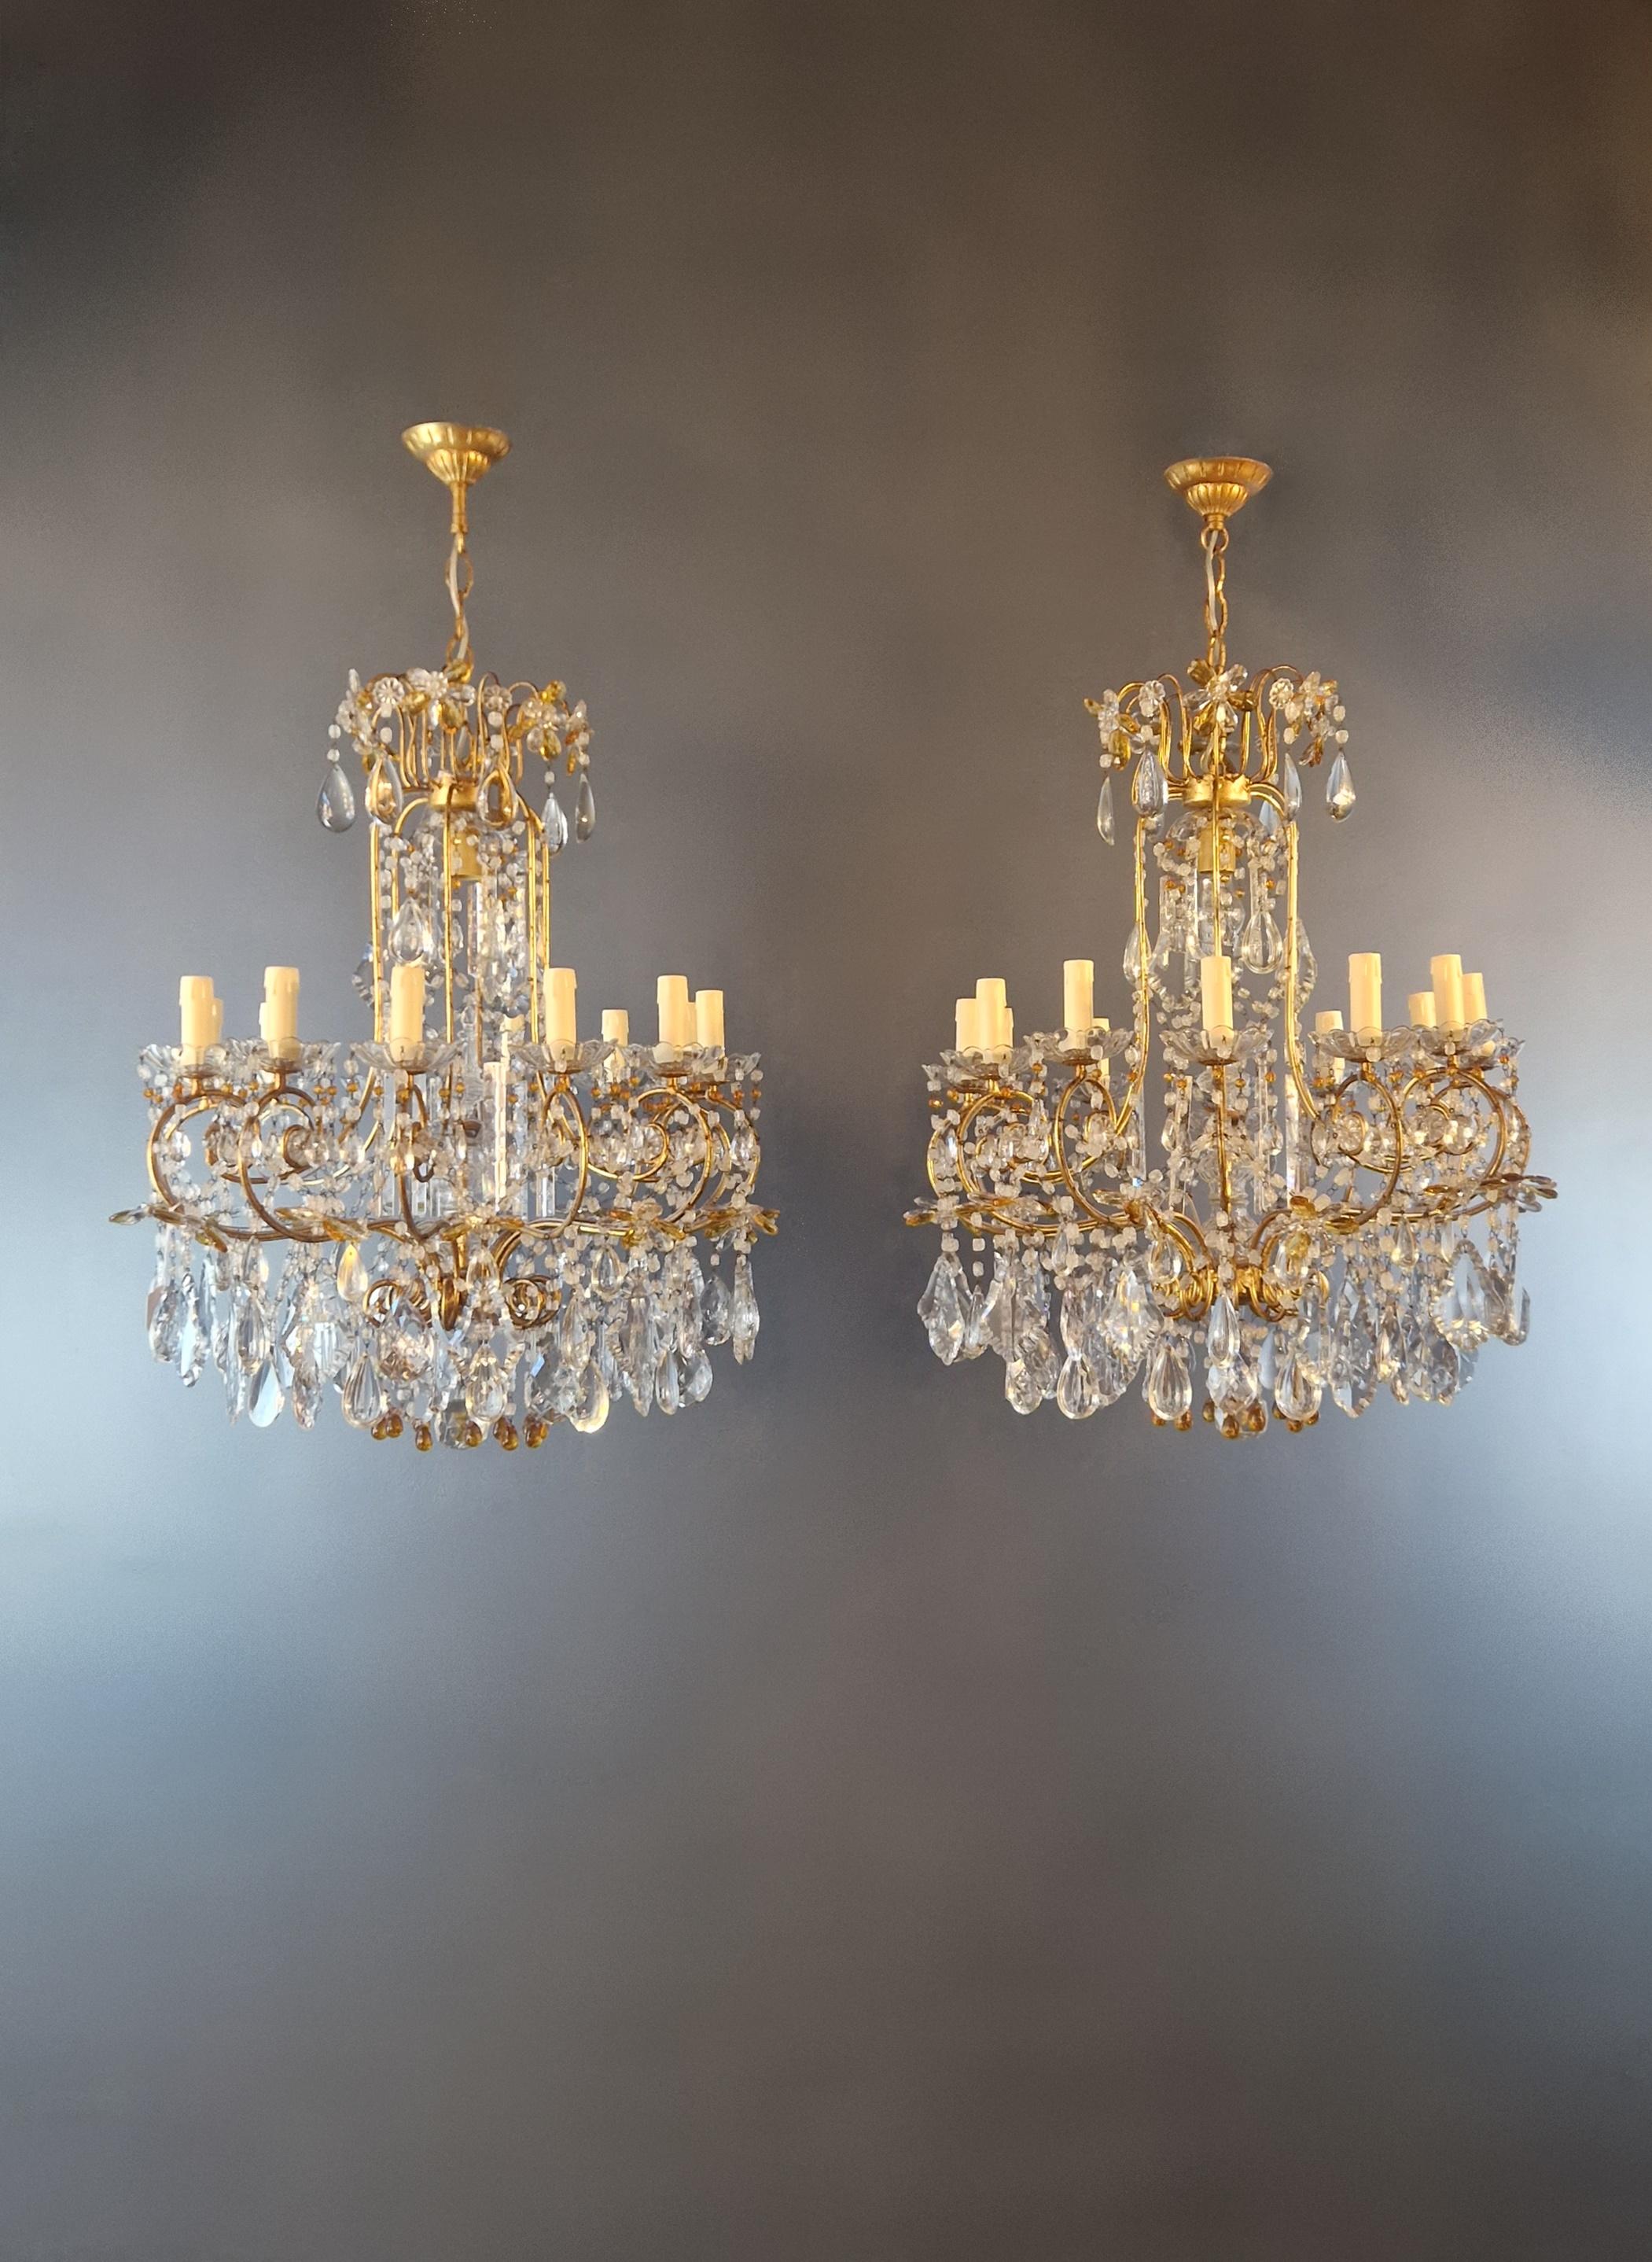 Exquisite antique twin crystal chandeliers: Where amber craftsmanship meets Art Nouveau splendor

Immerse yourself in the magic of bygone times with these exquisite chandeliers. A mixture of elegance and Art Nouveau opulence. Carefully restored in